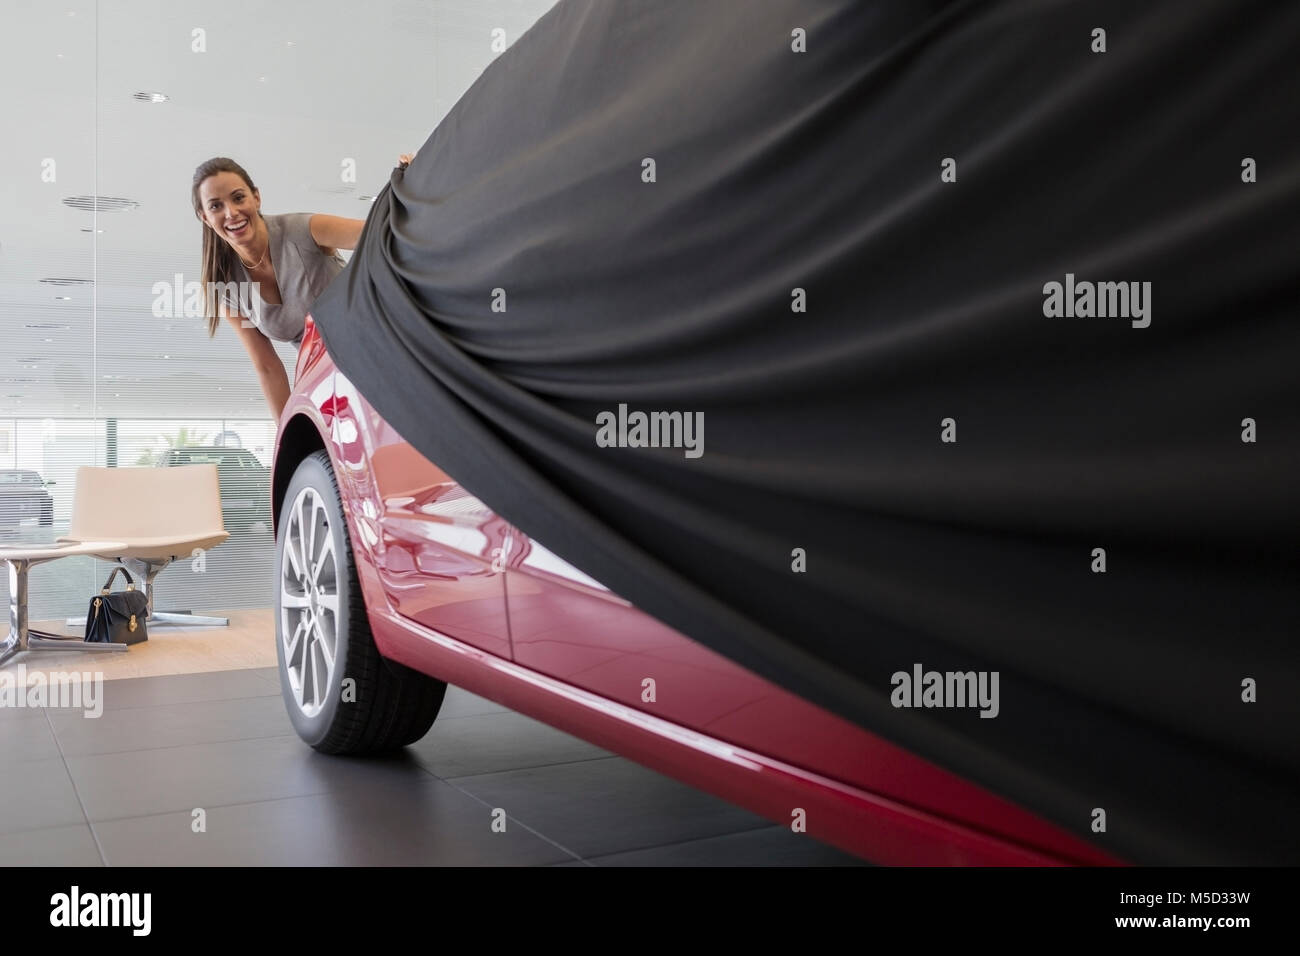 Female customer removing cover from new car in car dealership showroom Stock Photo